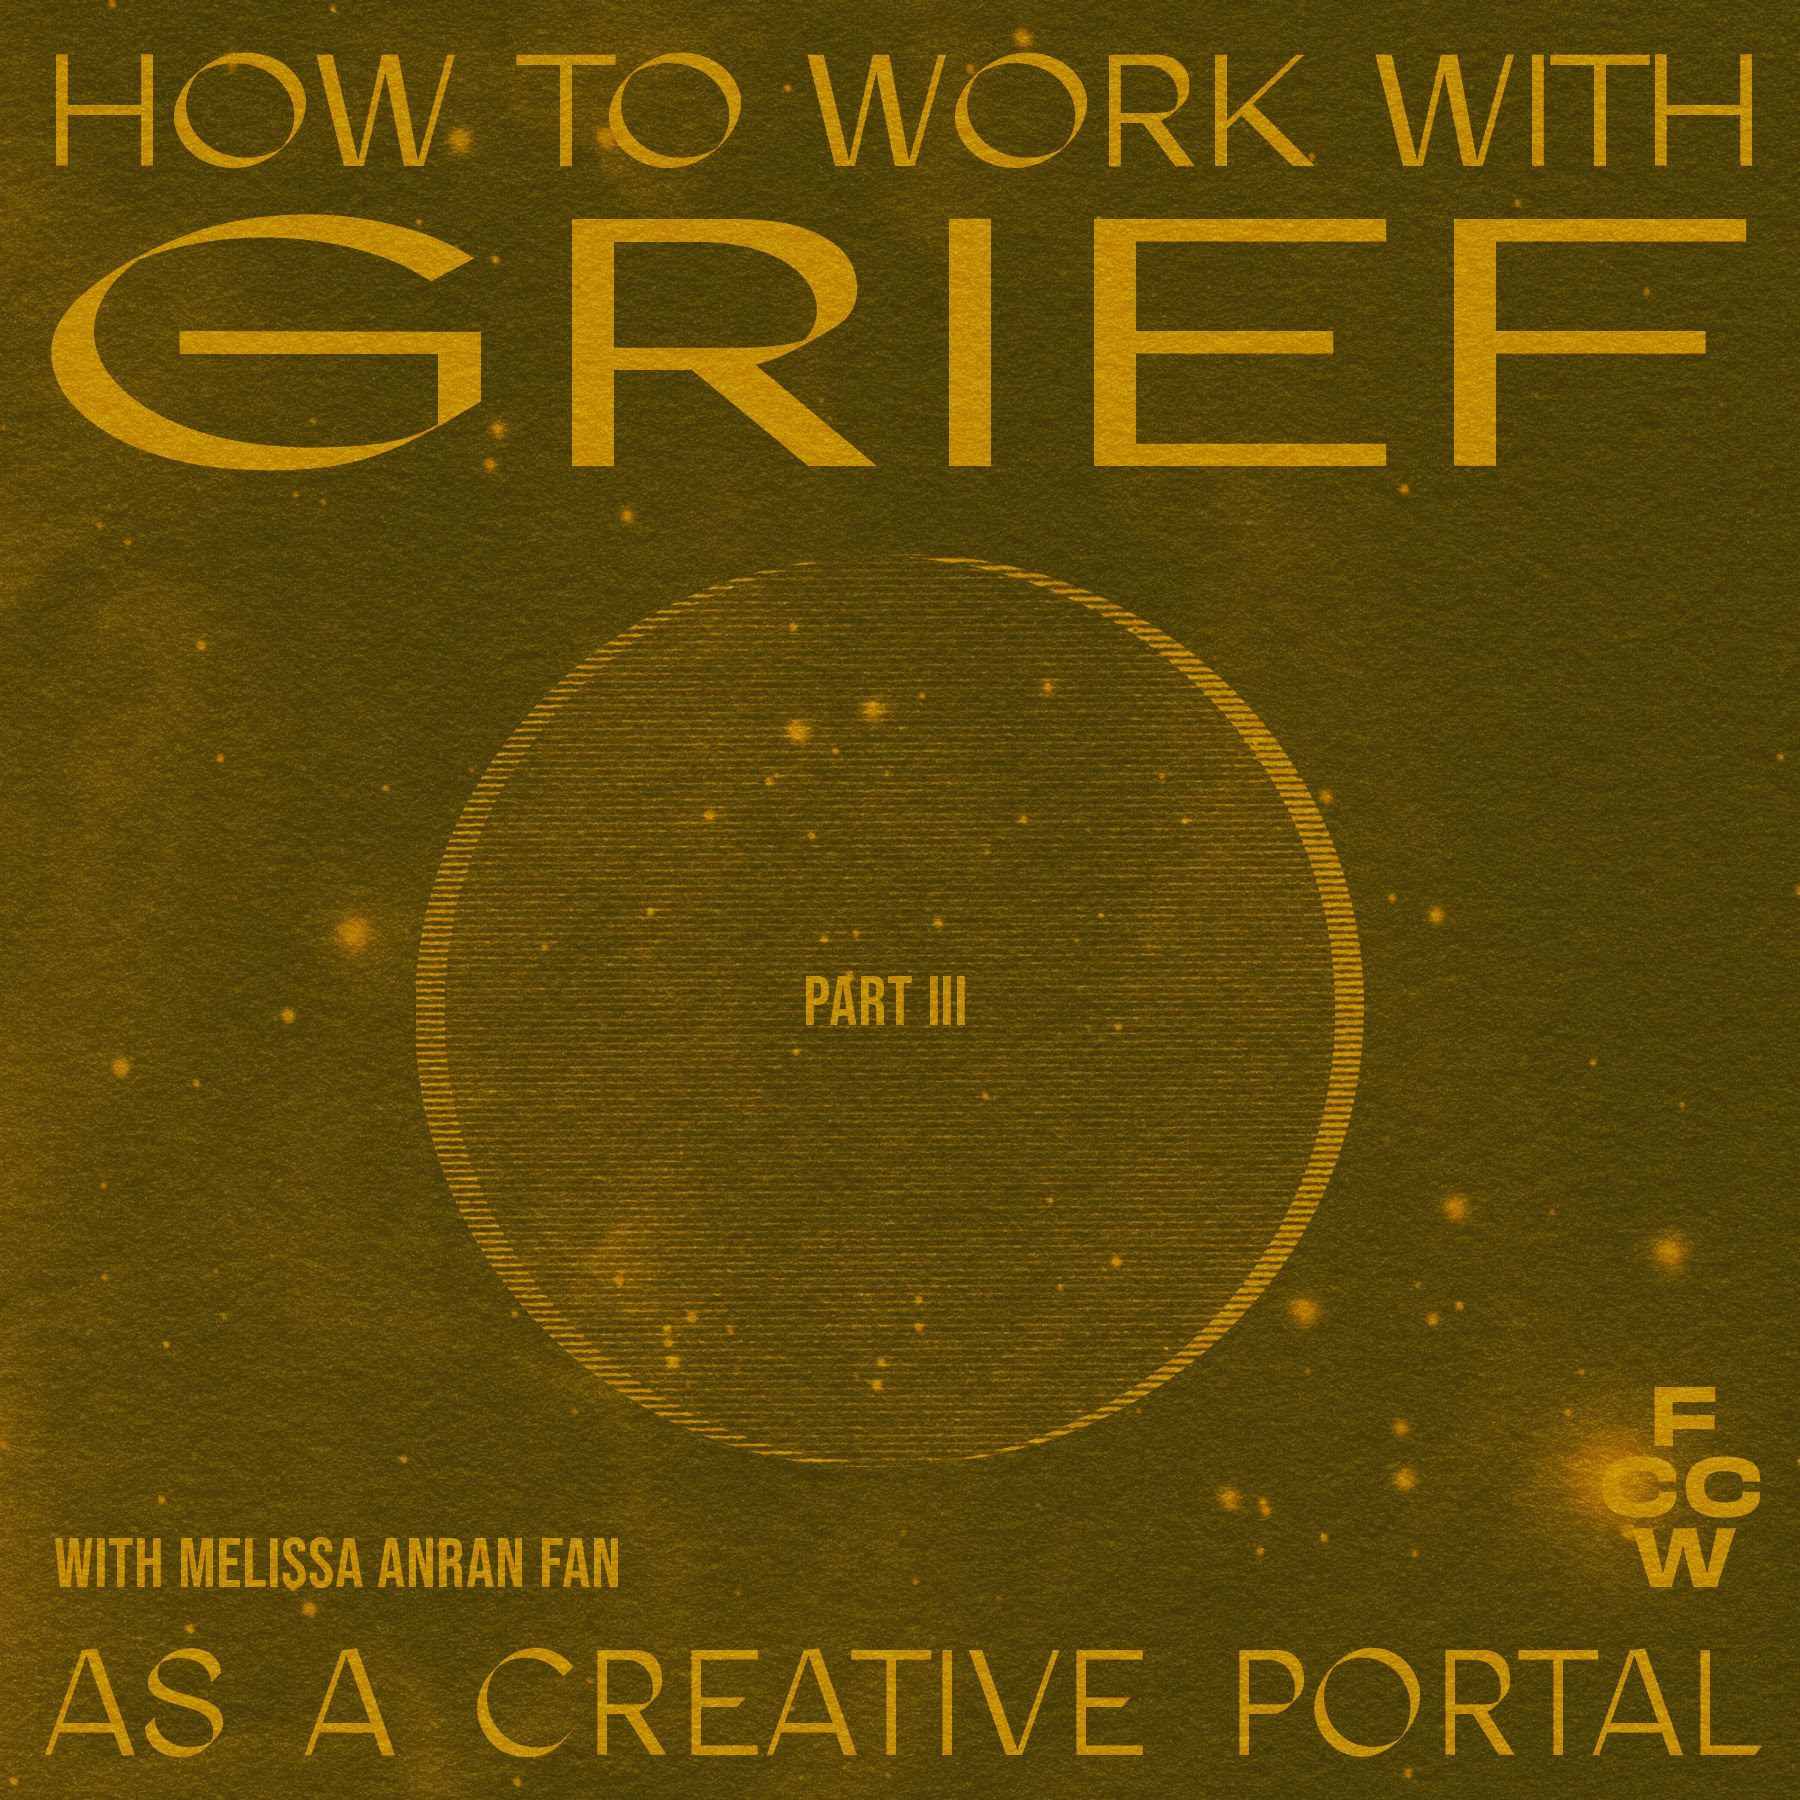 How To Work With Grief As A Creative Portal Workshop Series